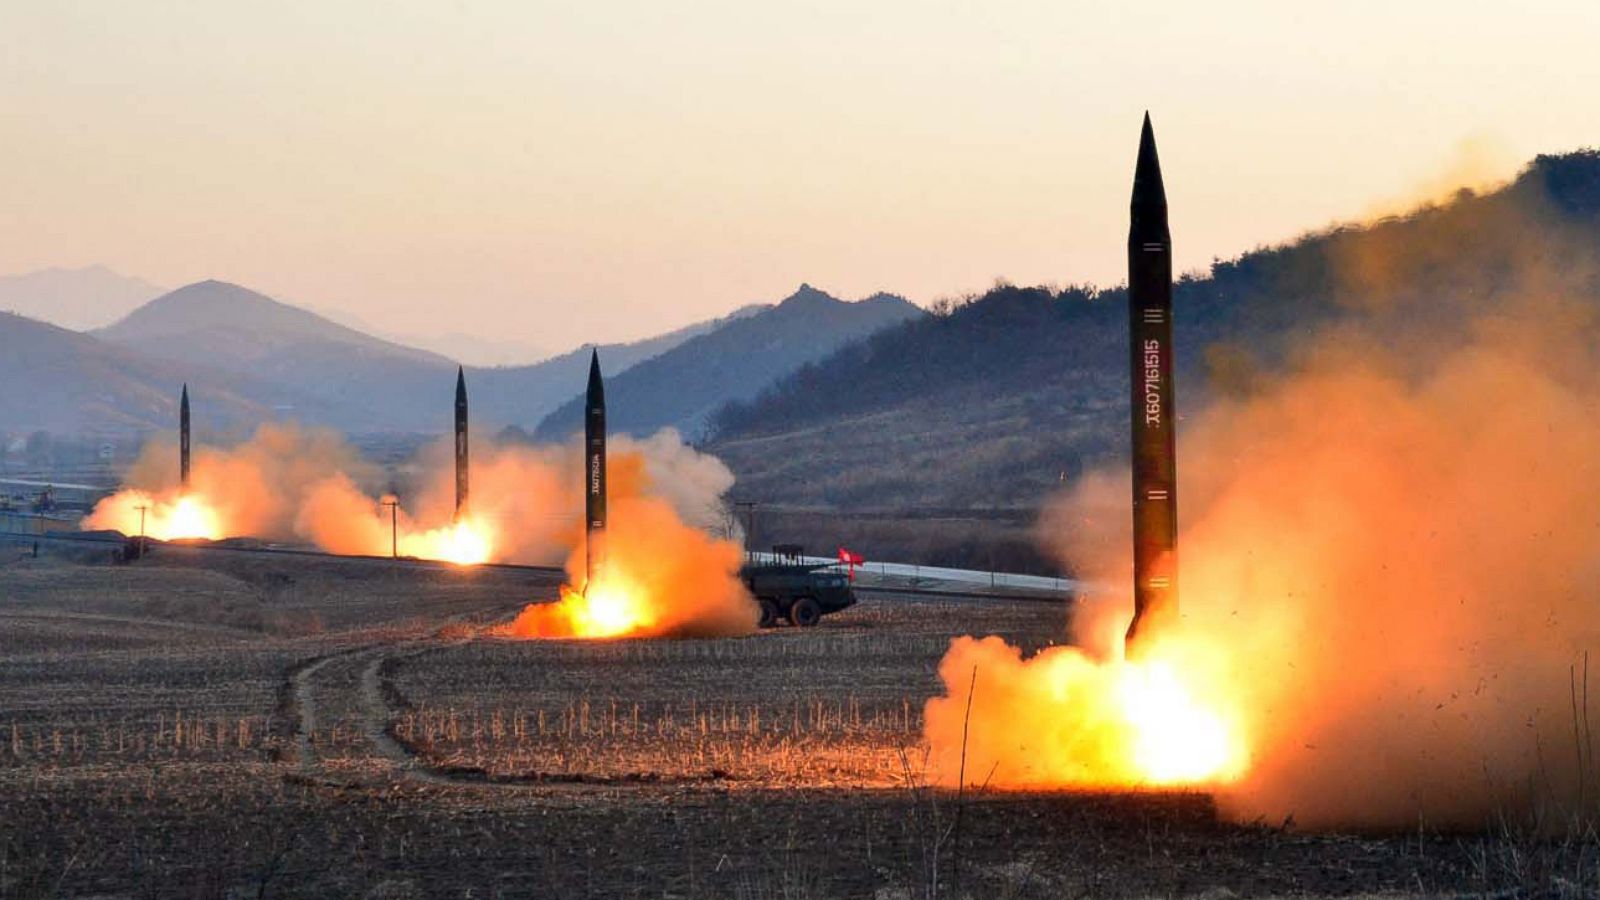 gty-north-korea-missile-launch-04-jc-170307_16x9_1600